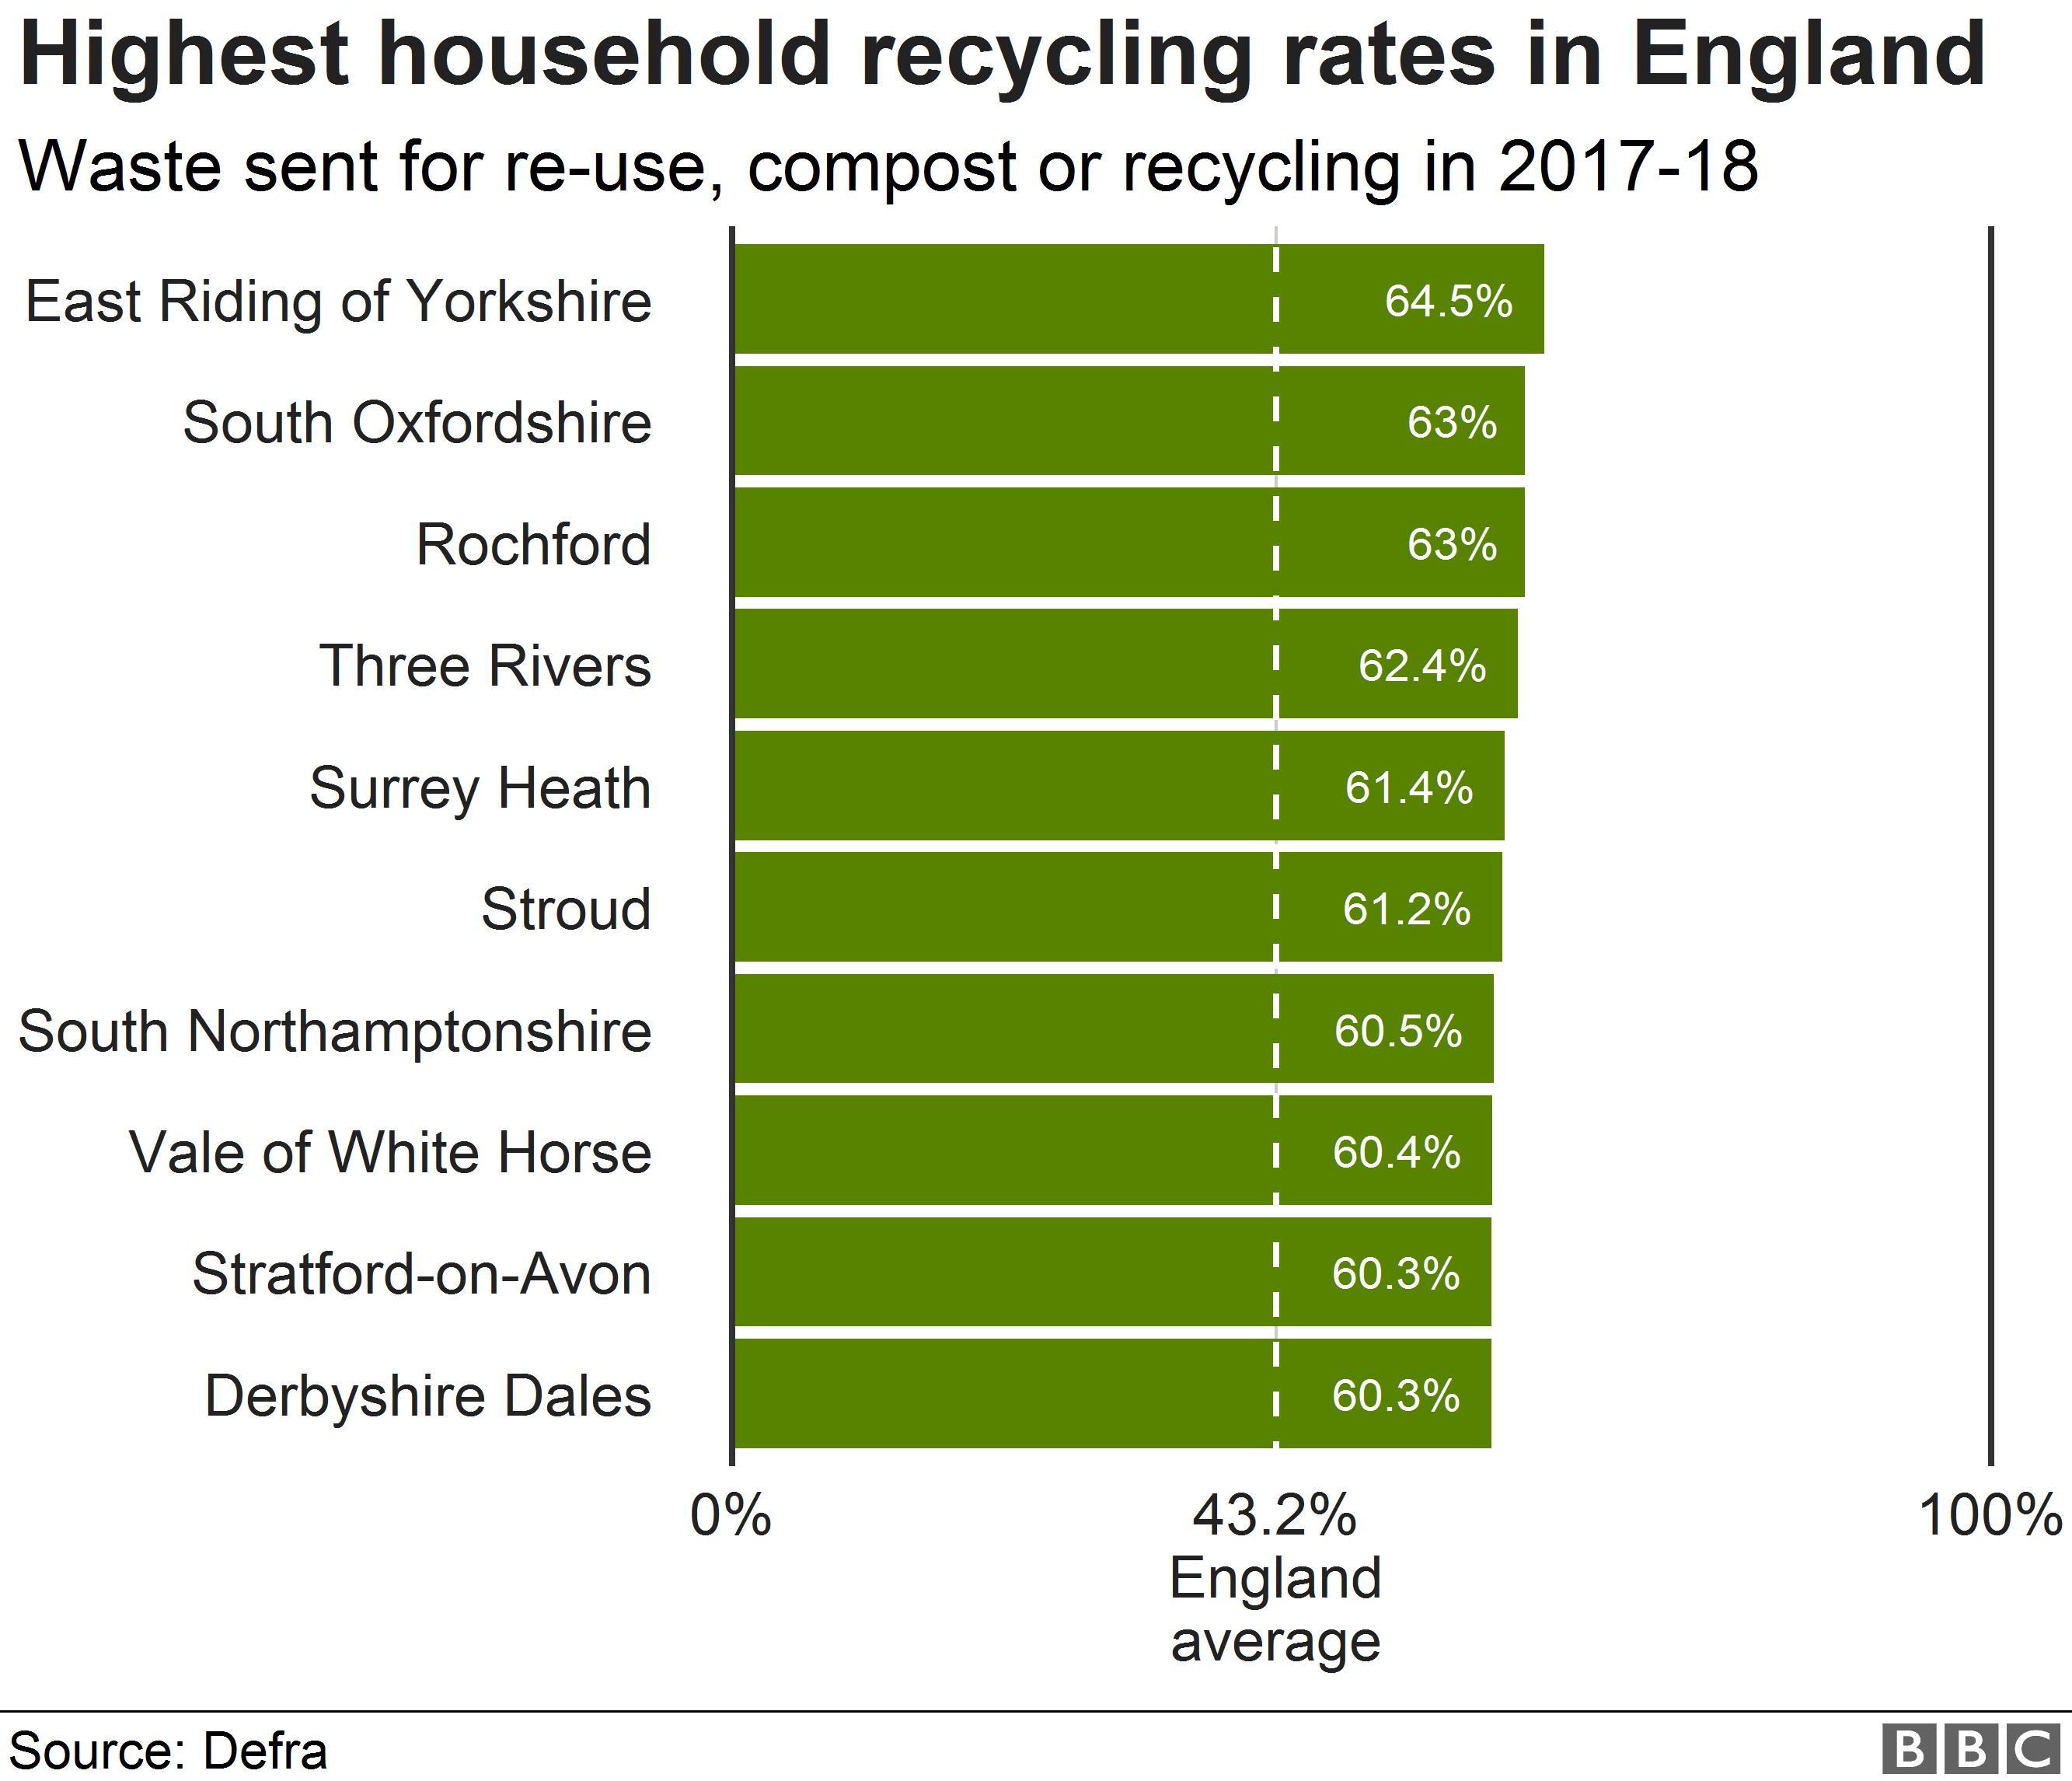 Highest household recycling rates in England